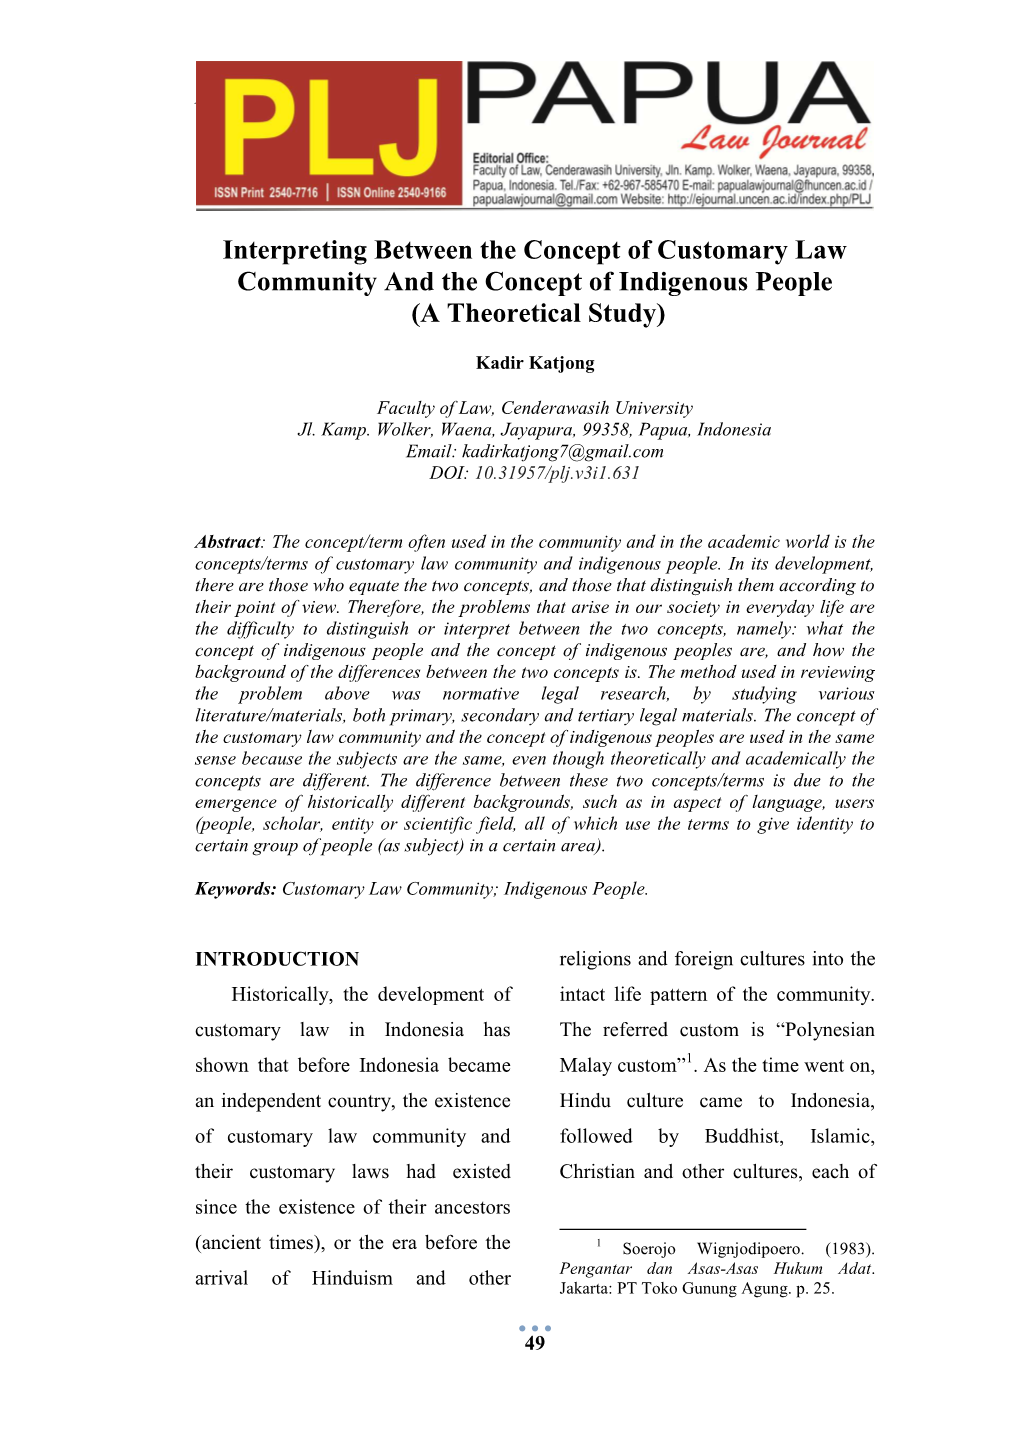 Interpreting Between the Concept of Customary Law Community and the Concept of Indigenous People (A Theoretical Study)